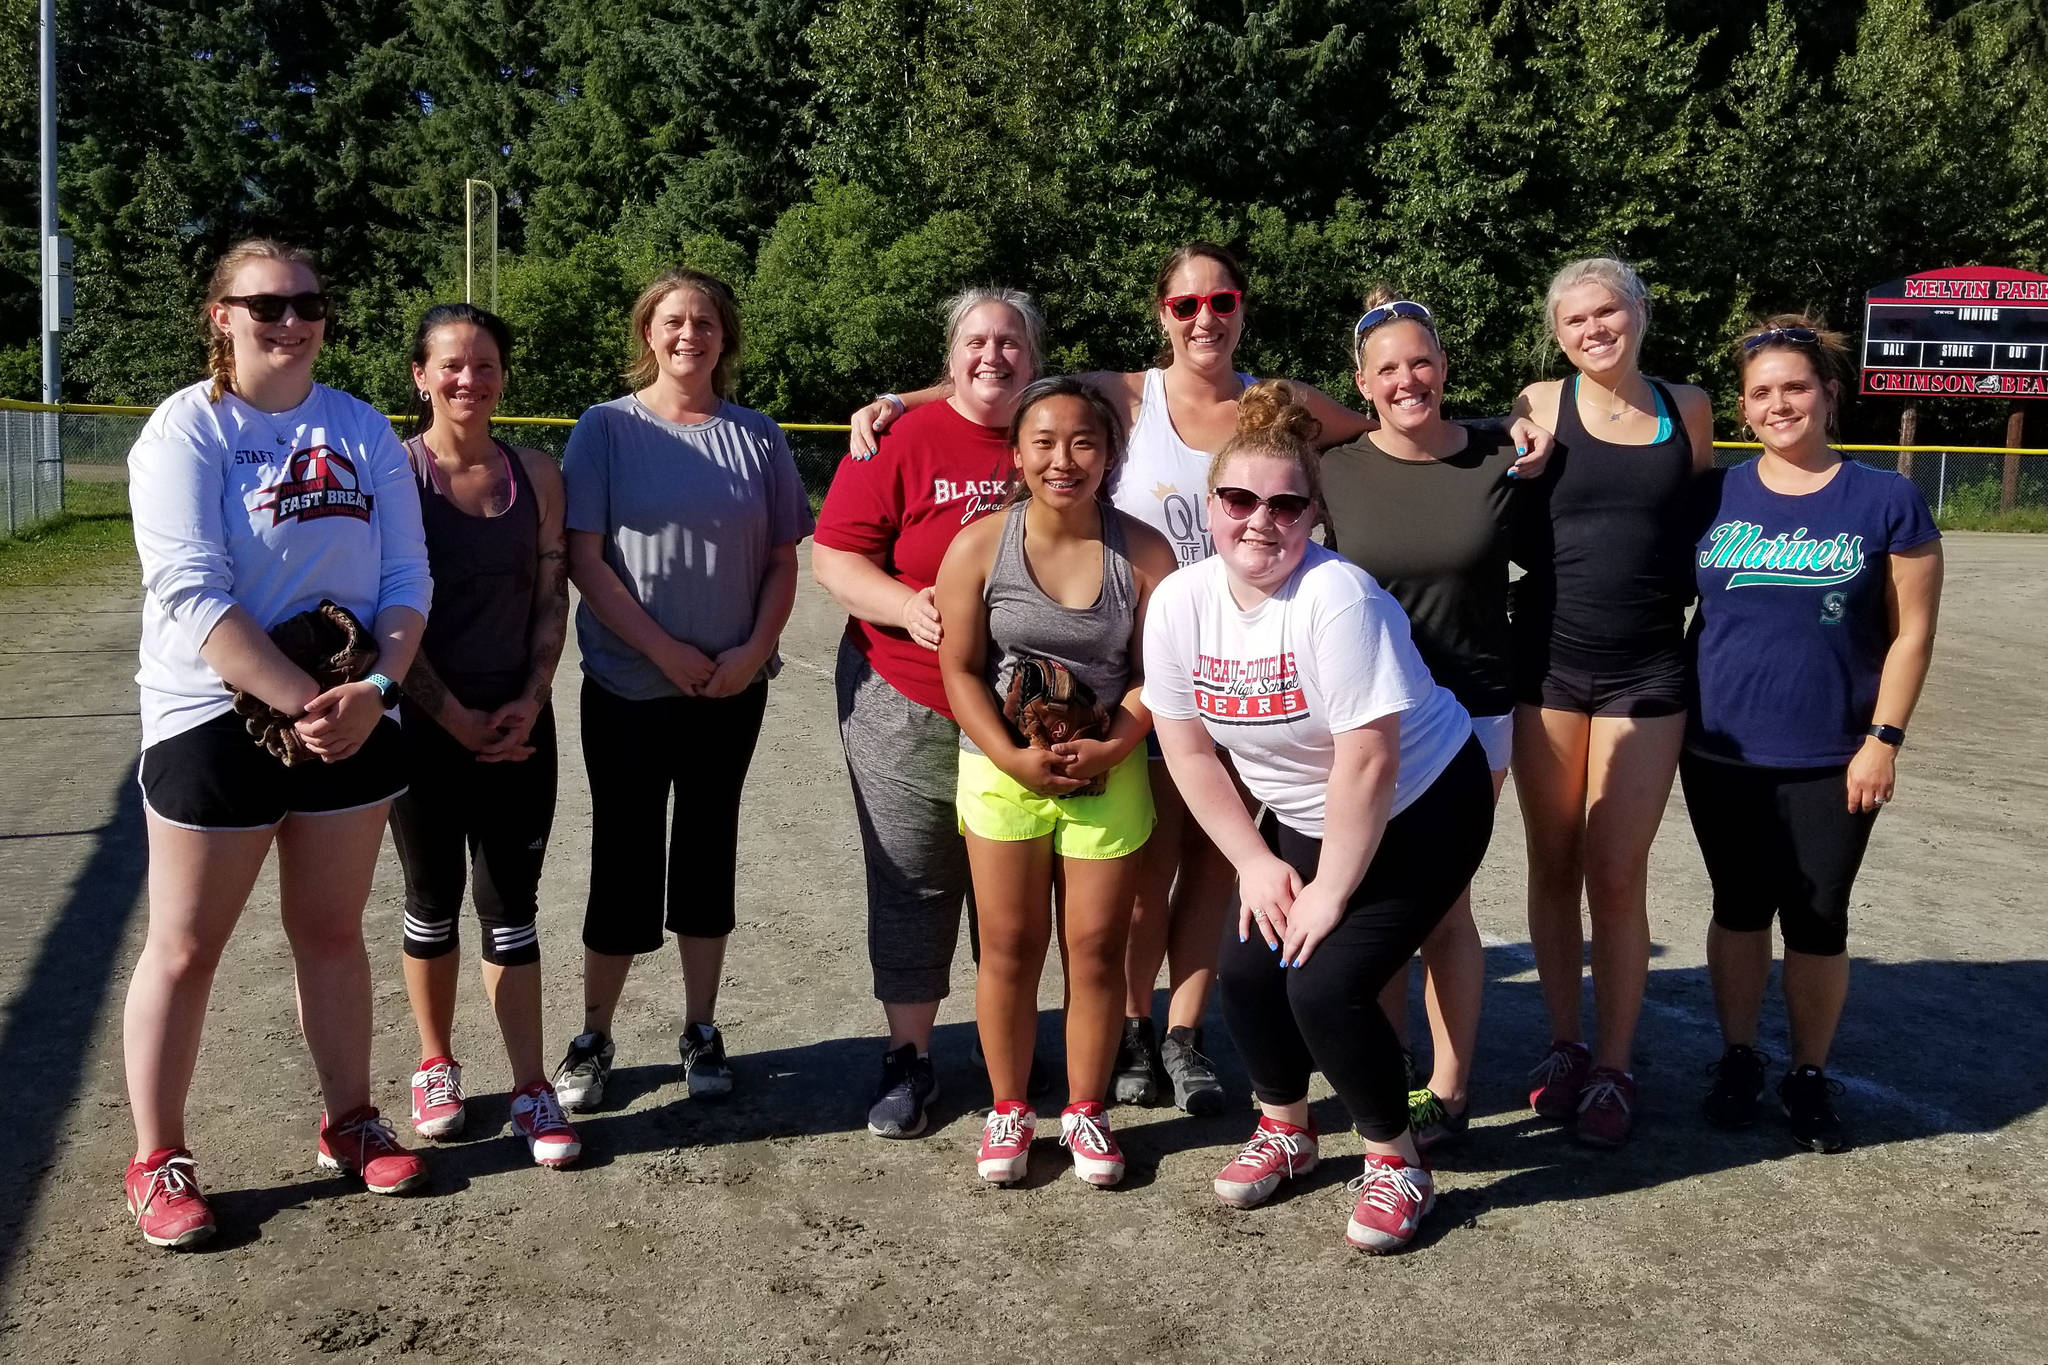 Former members of the Juneau-Douglas High School: Yadaat.at Kalé softball team will play an alumni game on Sunday to raise money for travel and equipment for the team. (Courtesy photo | Alexandra Razor)